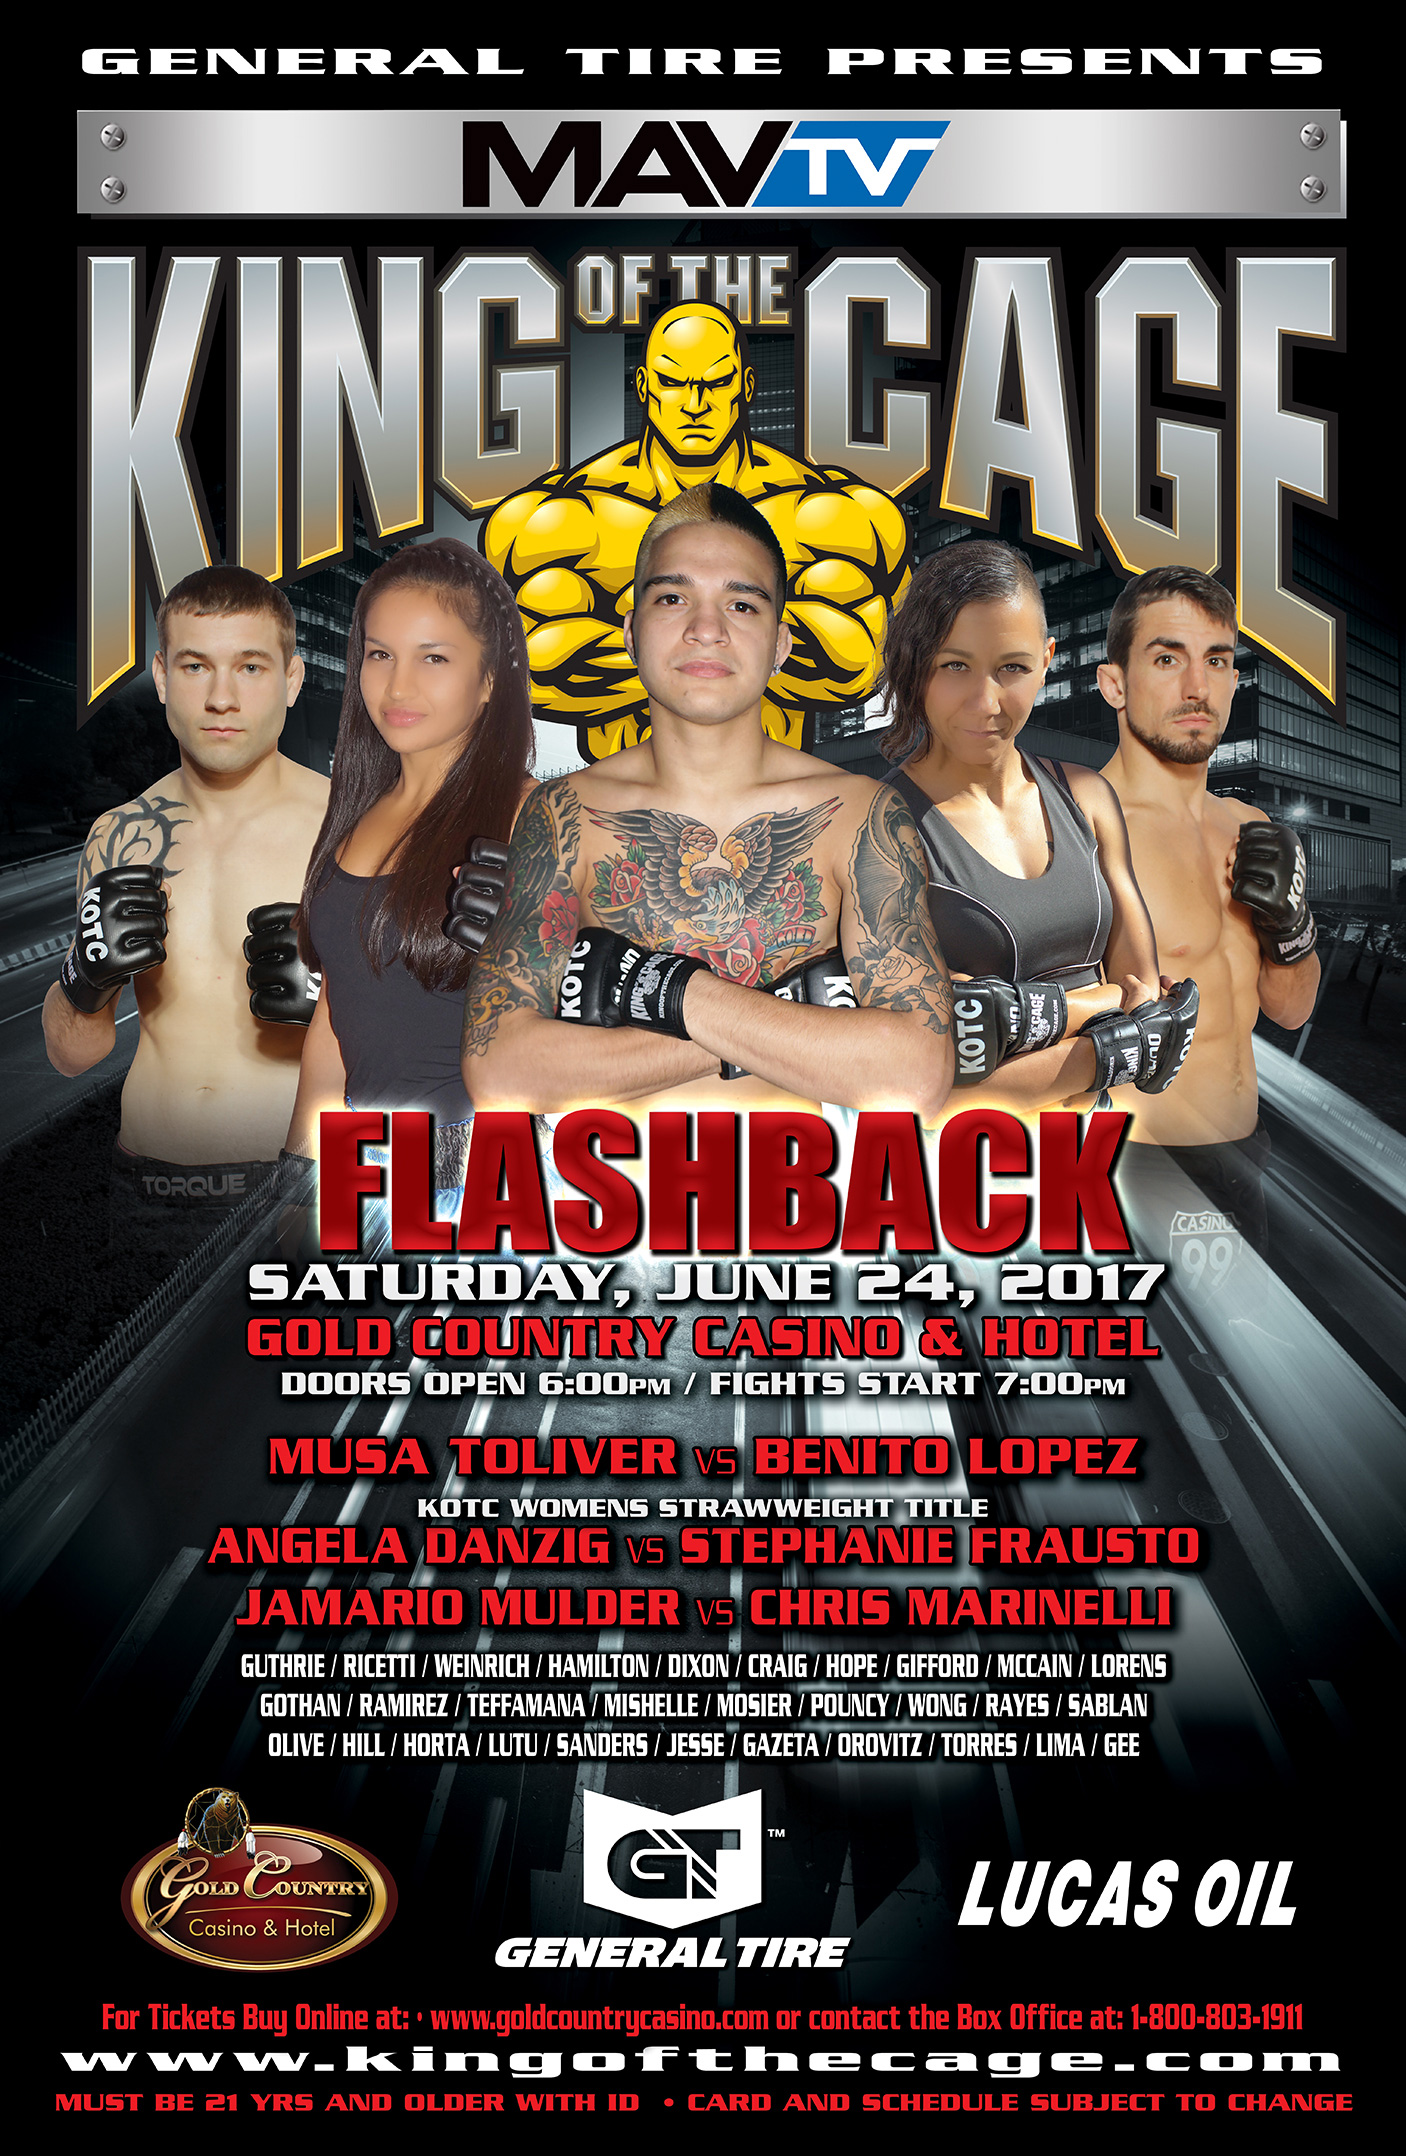 King of the Cage Returns to the Gold Country Casino & Hotel on June 24 for “FLASHBACK”